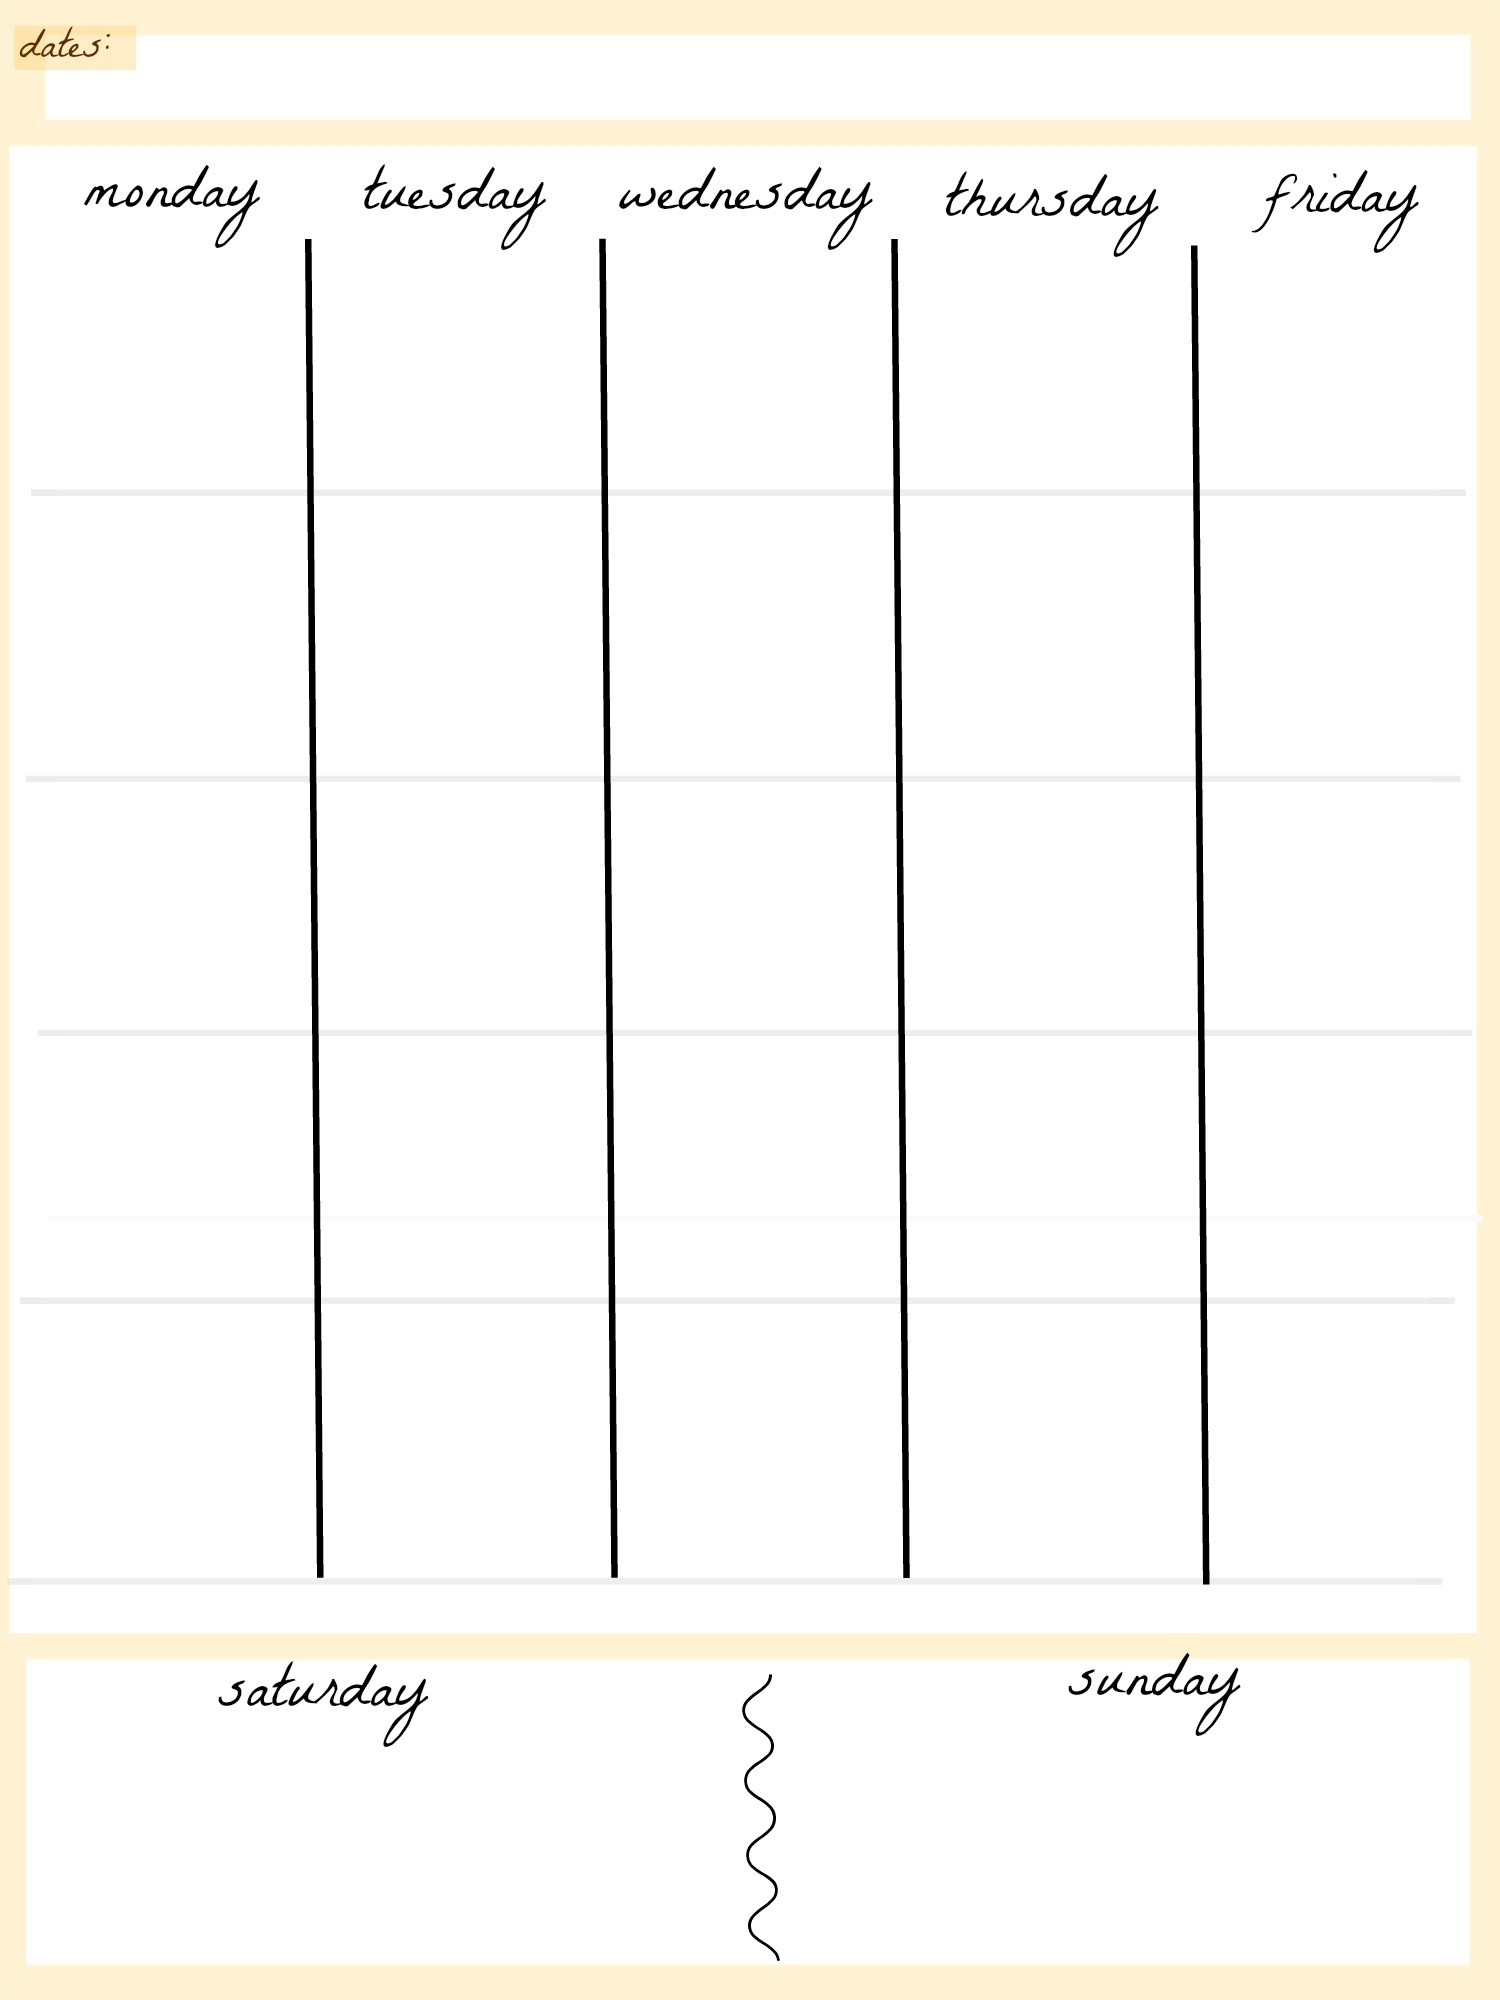 Images Of Days Of The Week Calendar For One Month | Template regarding Images Of Days Of The Week Calendar For One Month